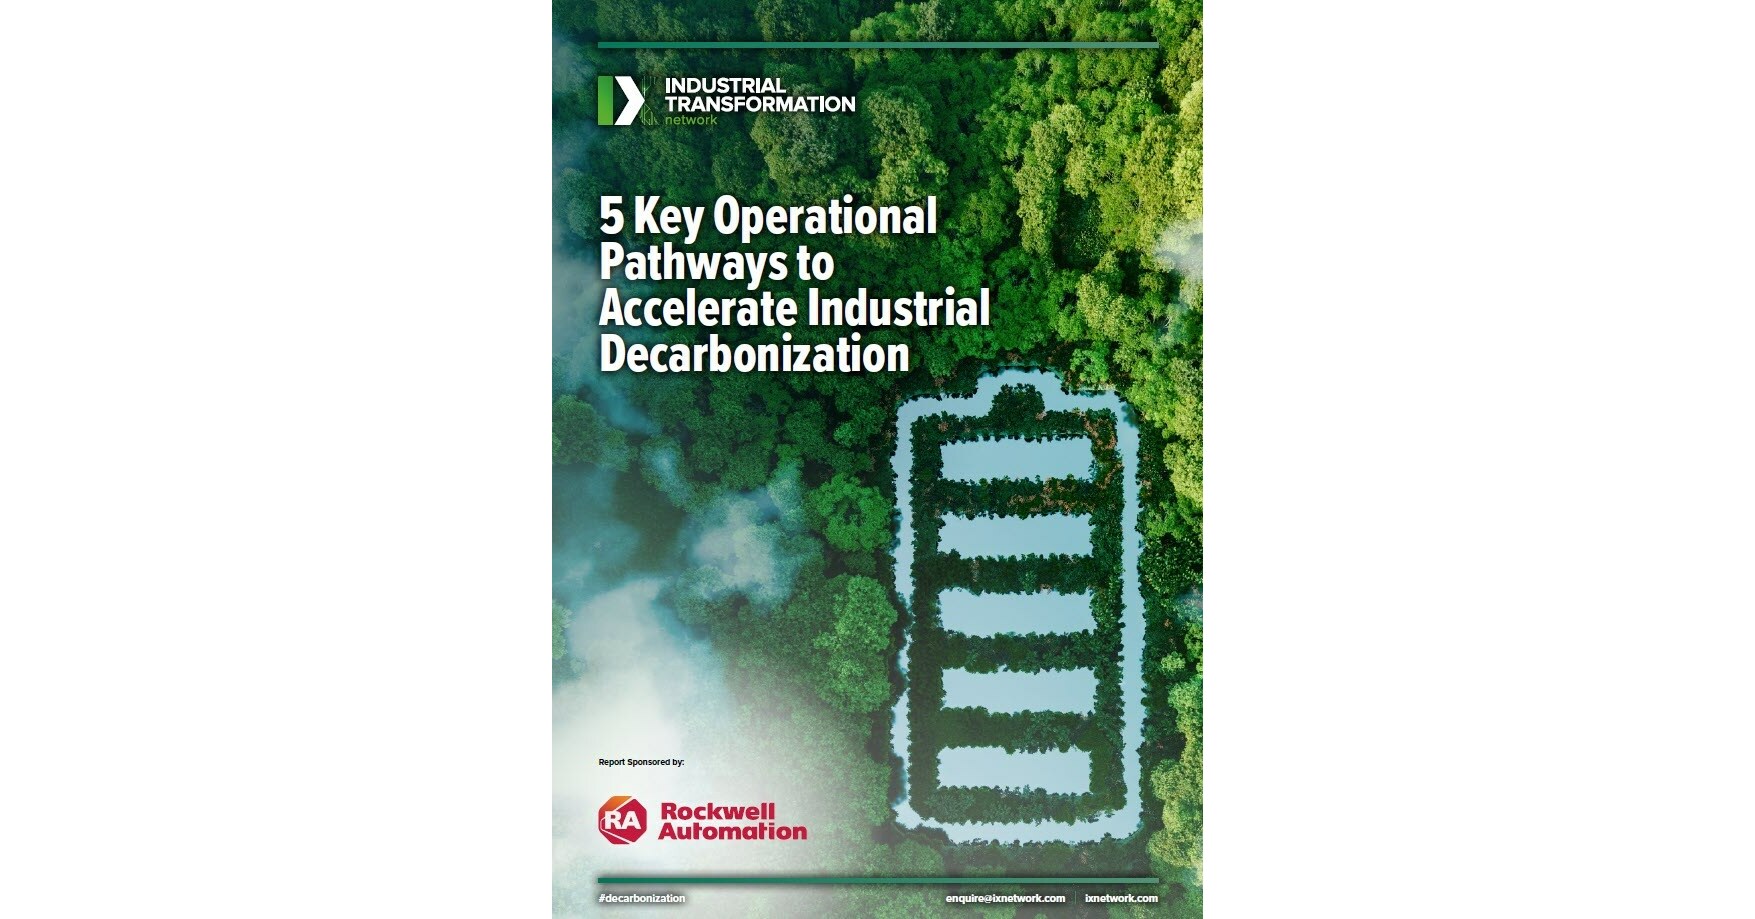 Rockwell Automation's Industrial Decarbonization report connects the dots between automation tech